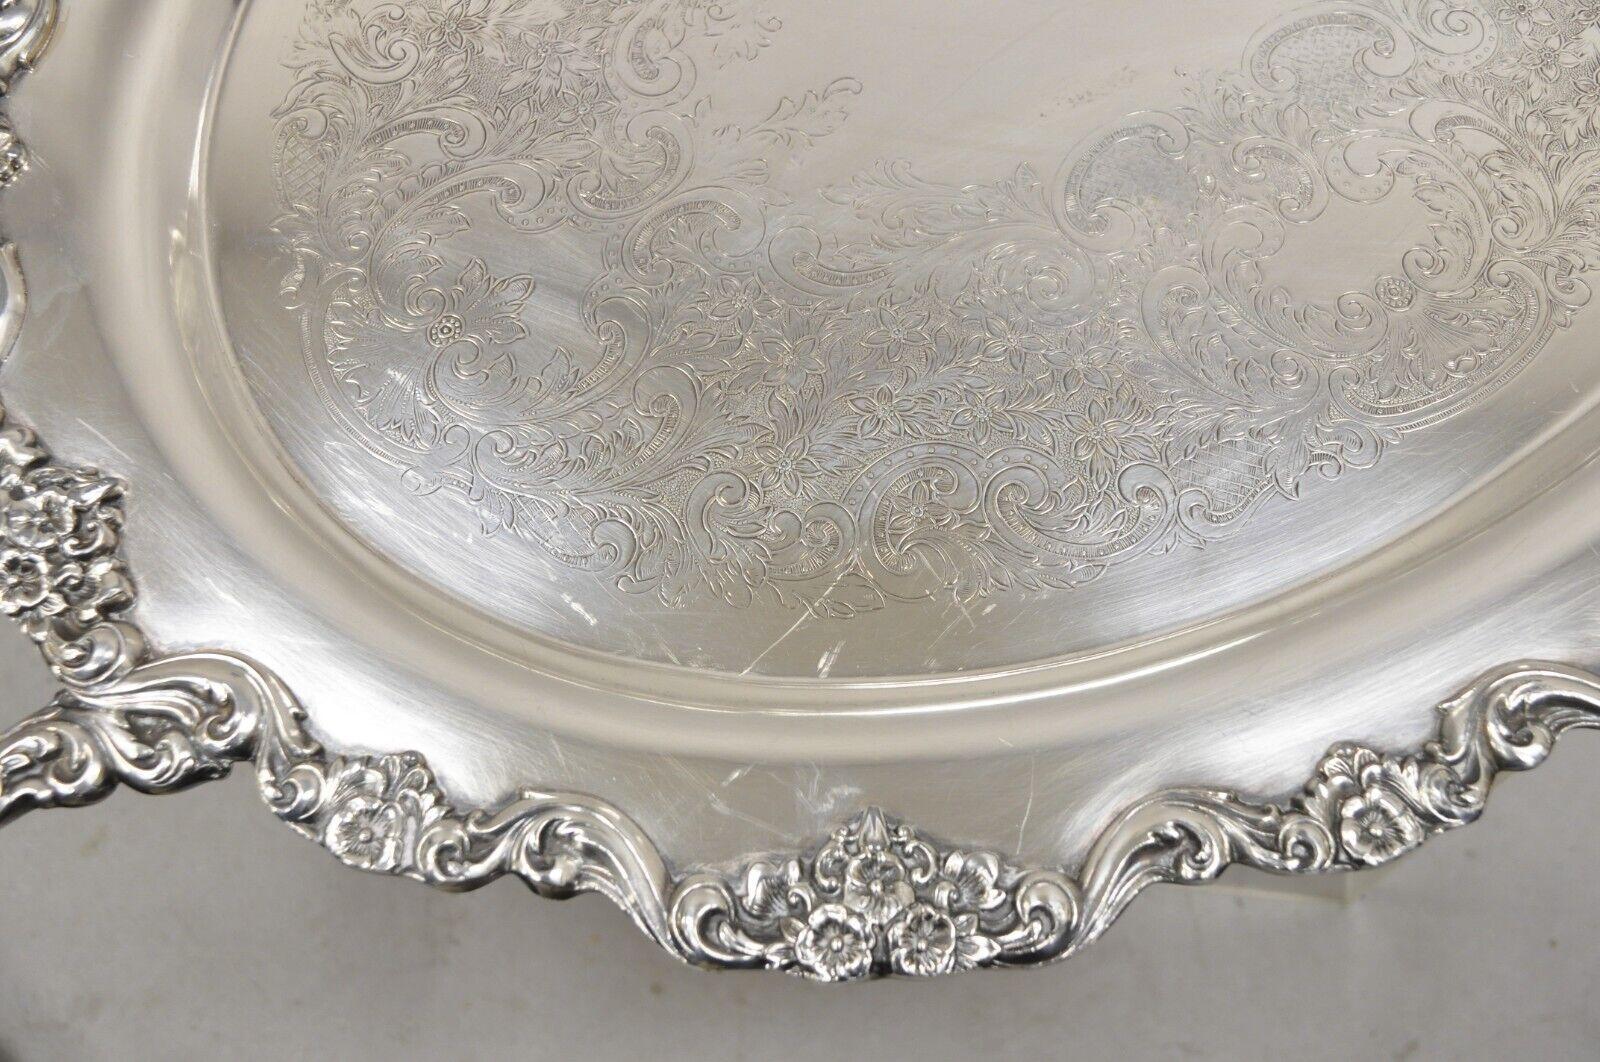 EPCA Poole Silver Co 400 Lancaster Rose Lrg Silver Plate Serving Platter Tray B For Sale 3